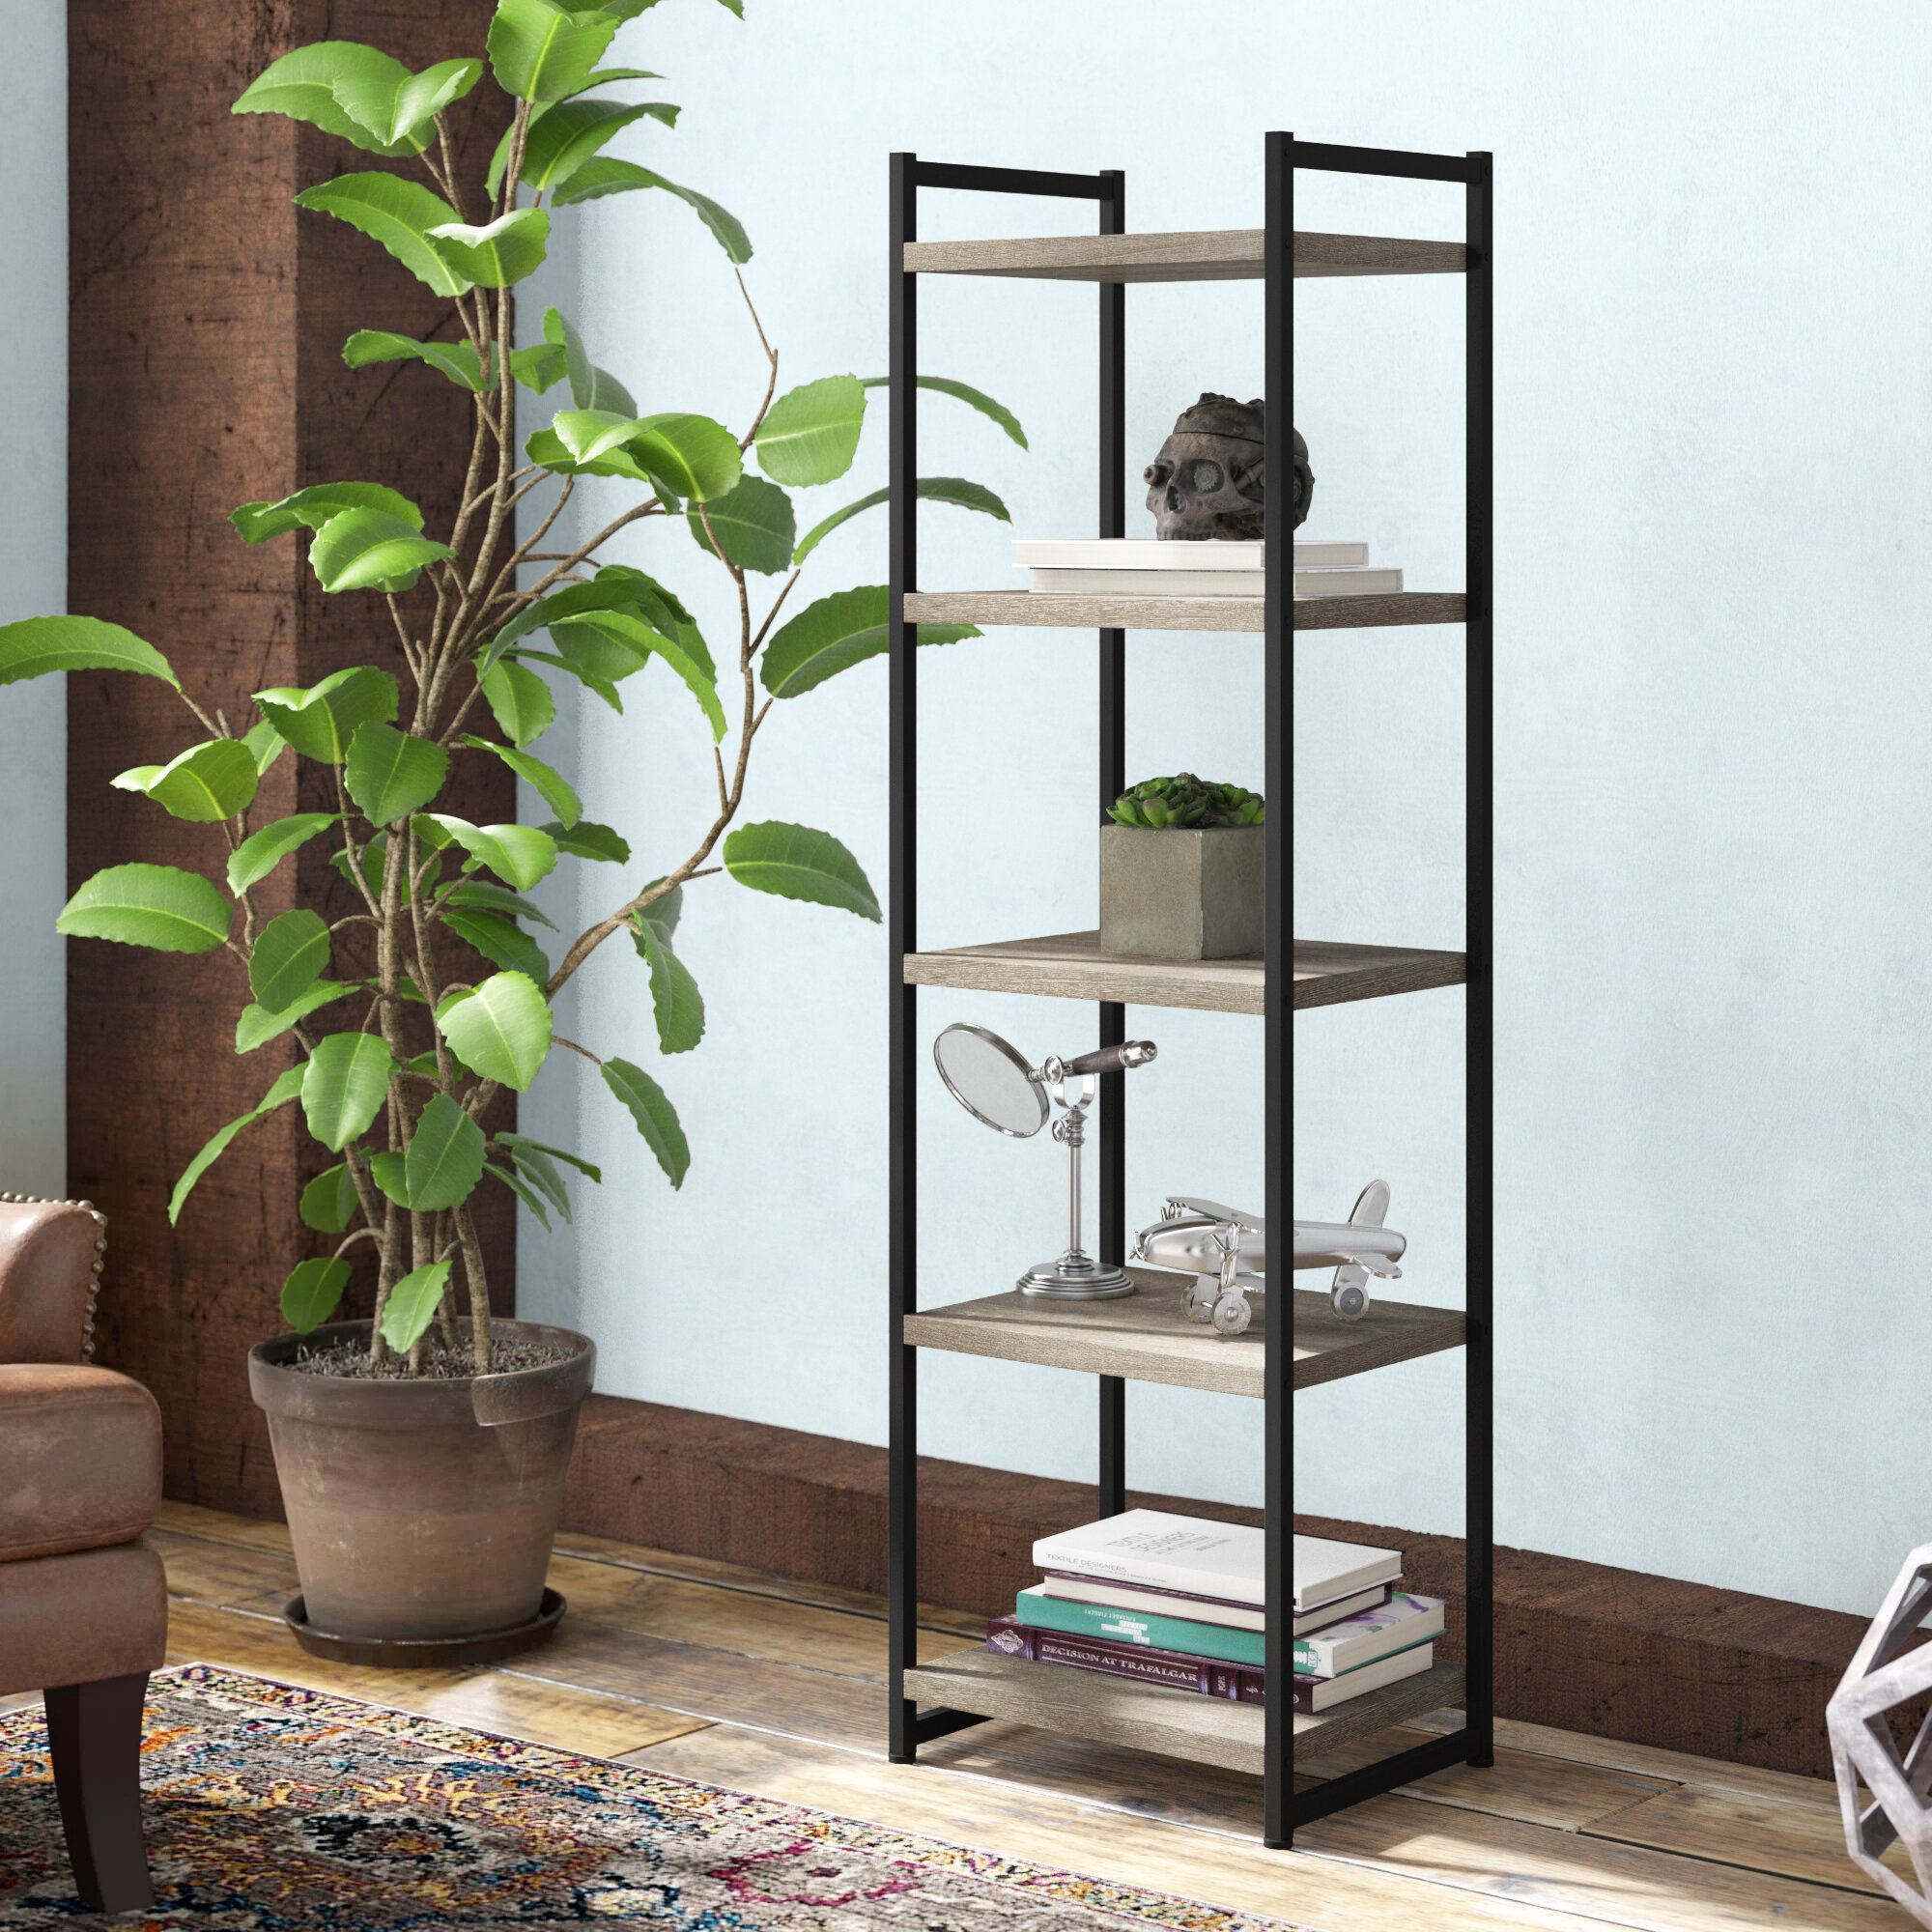 Ashwood & Essentials 4 Tier Storage Tower Shelf with Metal Ashwood Household Essentials Square Wooden Side Table/End Table with Storage Shelf Grey Shelves – Black Frame